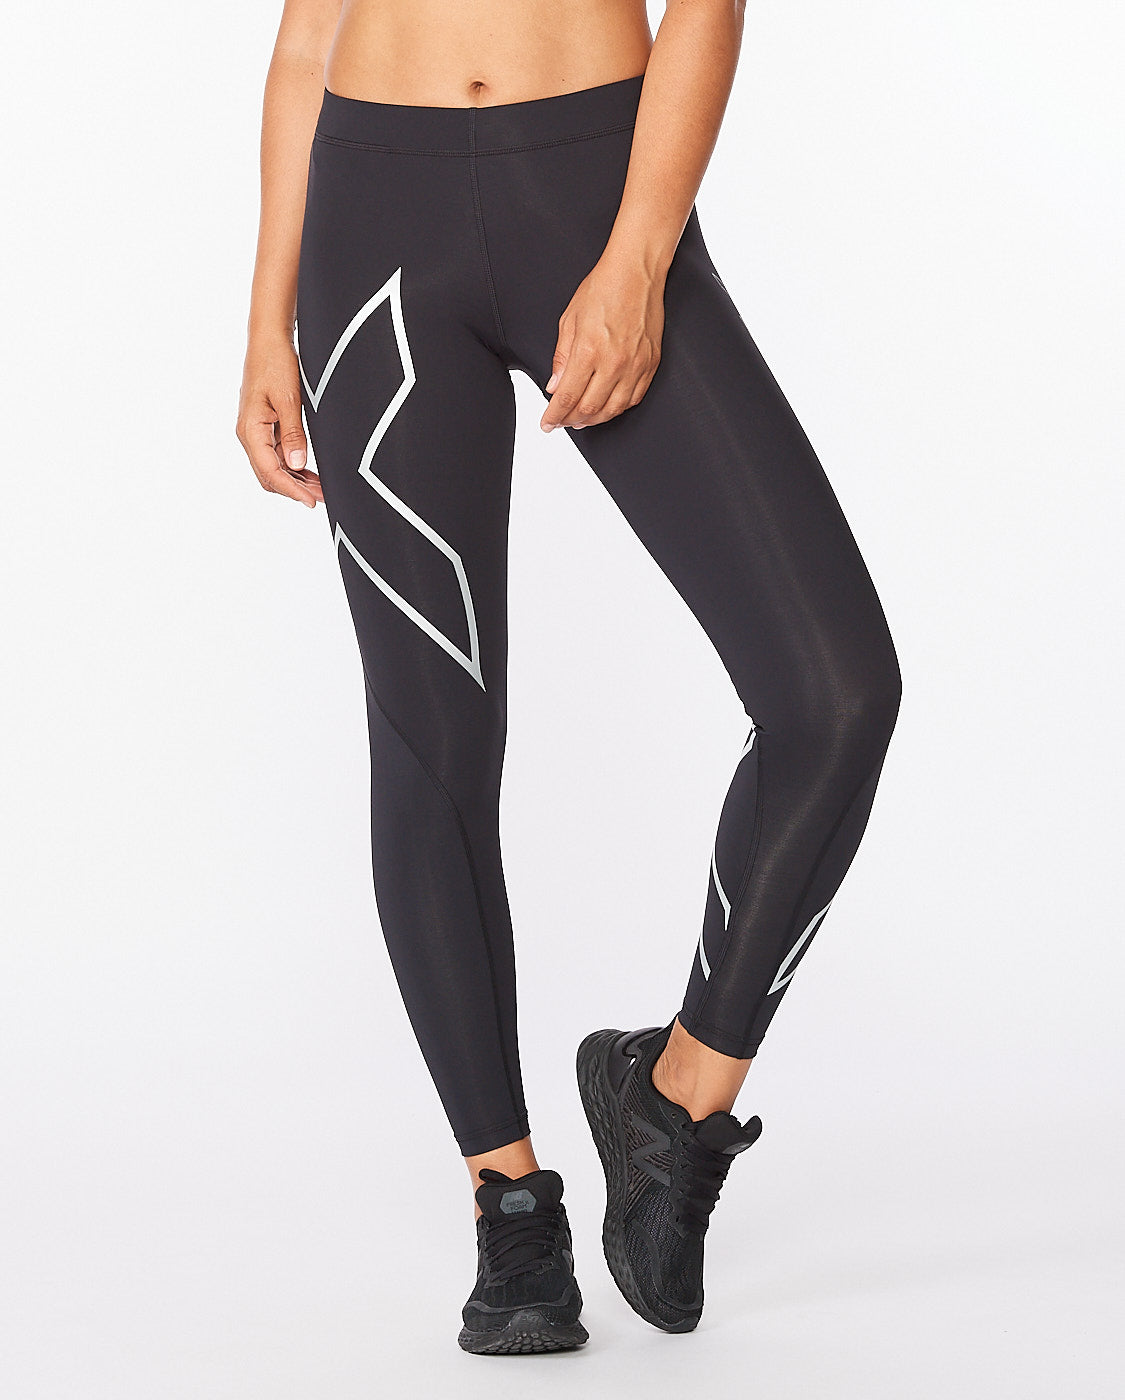 2XU Women's Mid Rise Compression Tights at